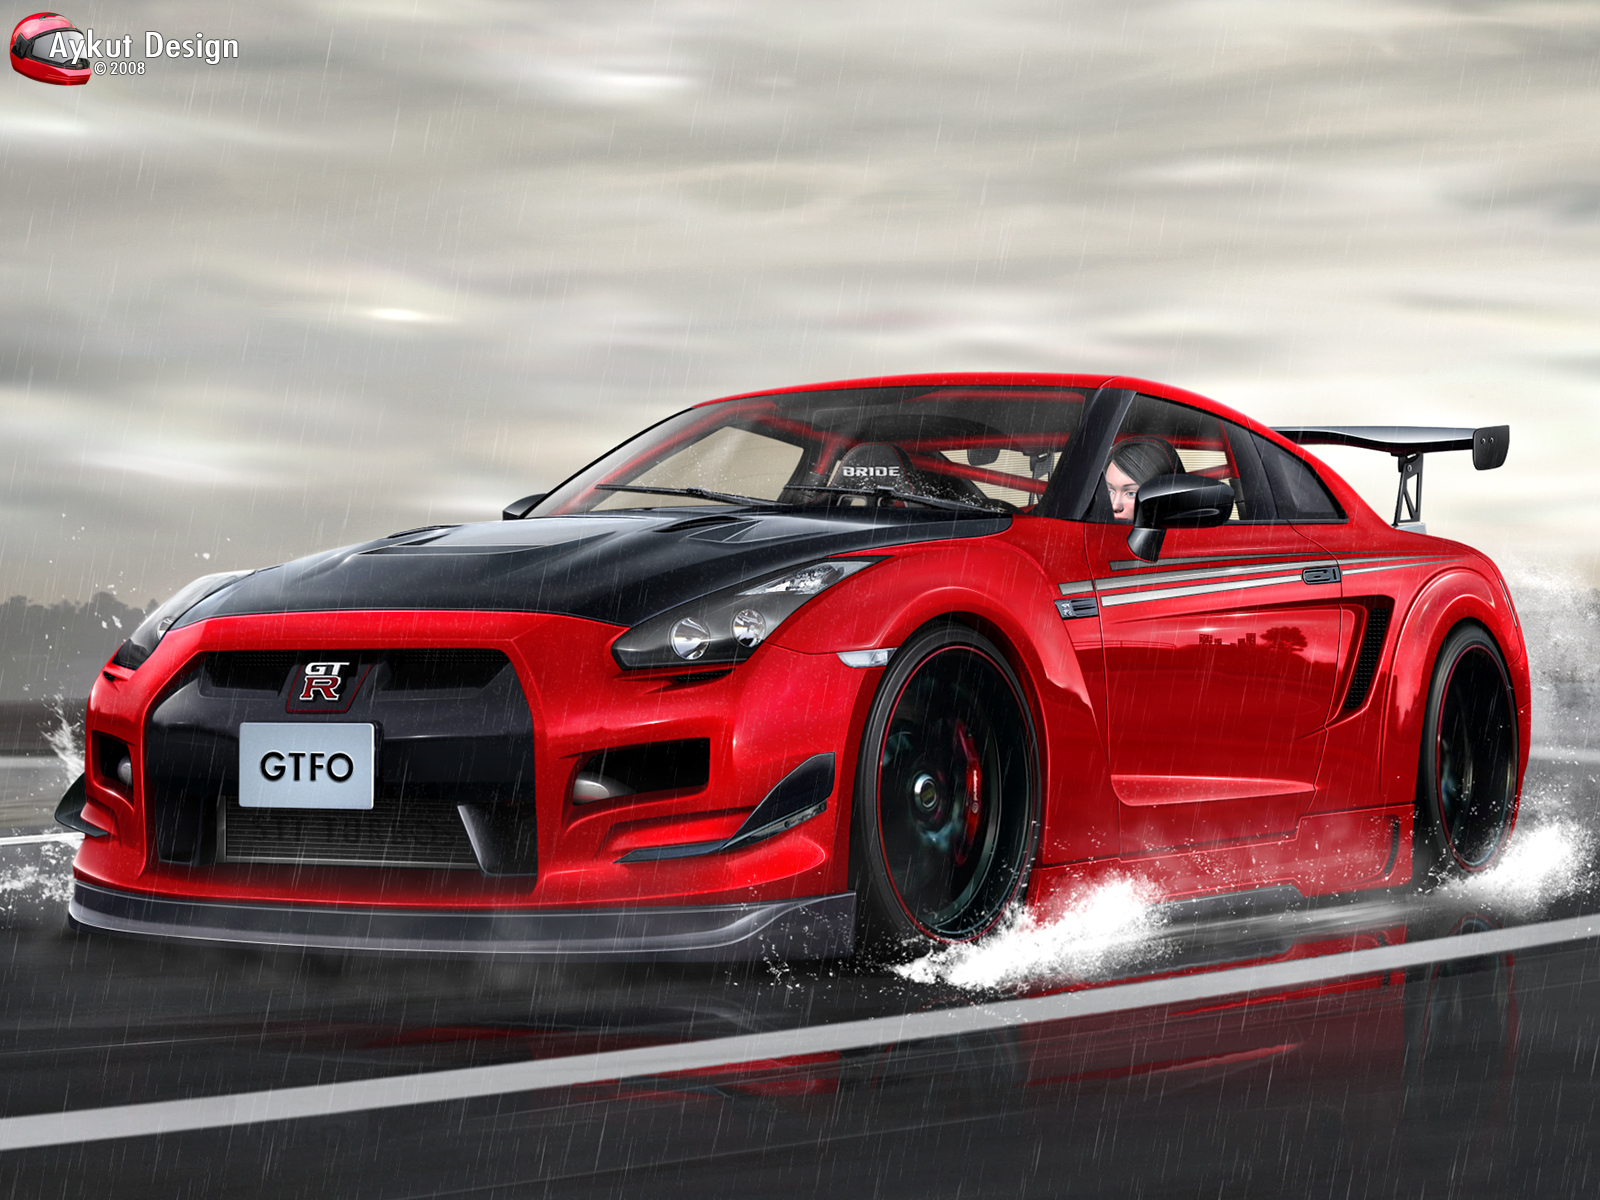 Nissan Gt R Nismo Wallpaper Full HD Pictures